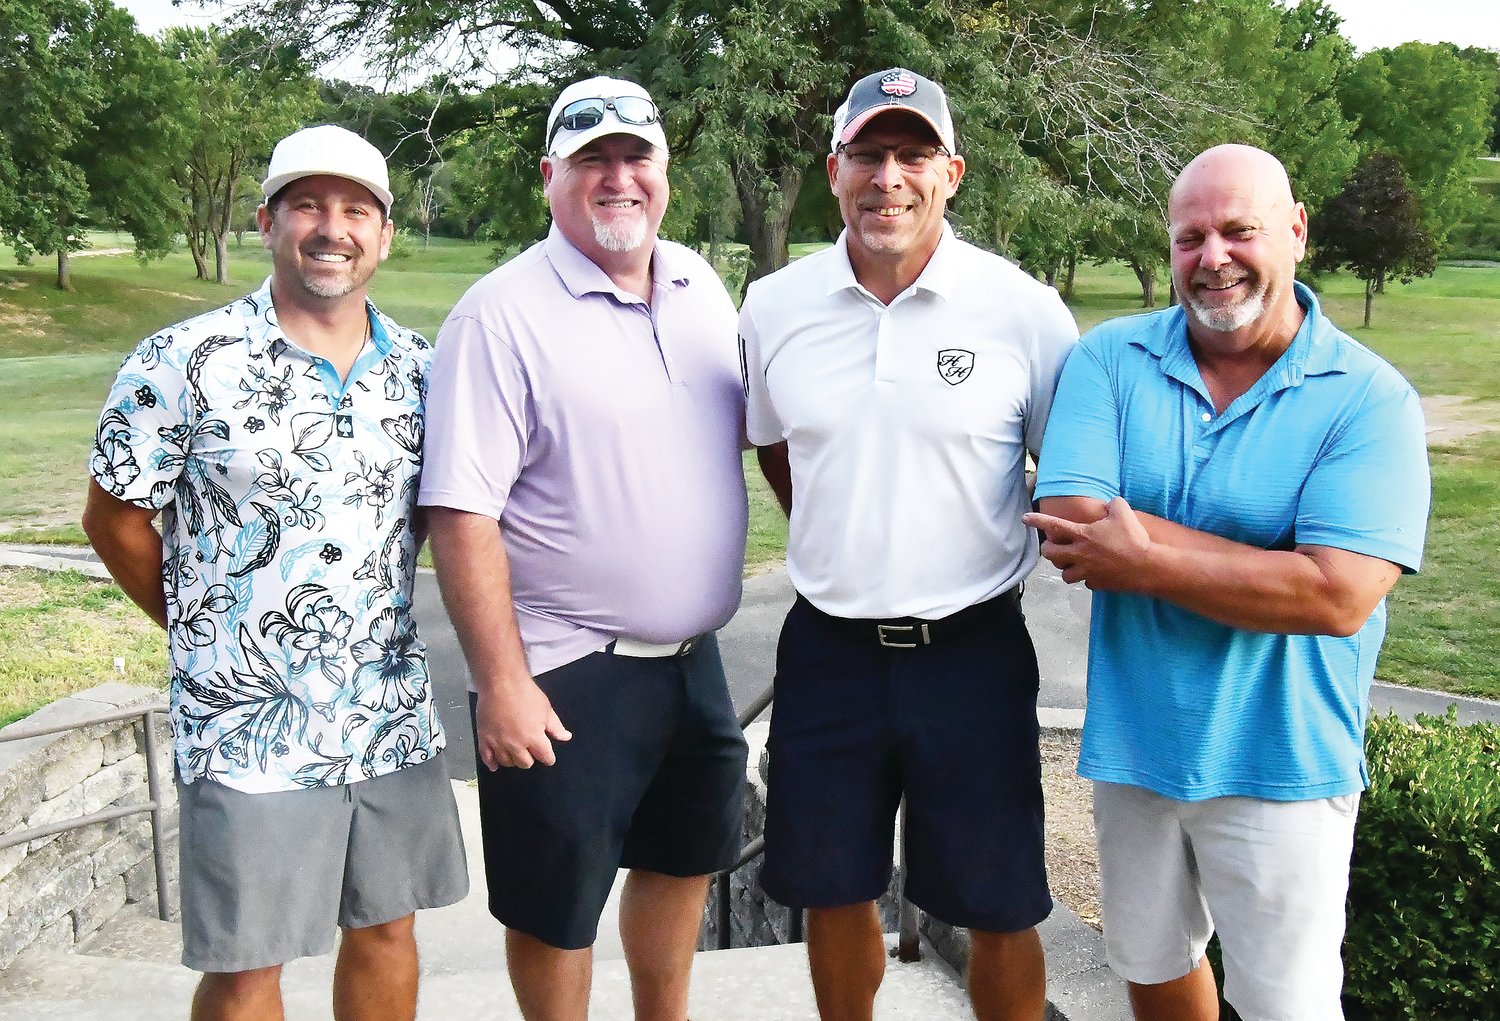 King Louie’s Meat Apostles won the championship flight at the annual Cotton Fitzsimmons Golf Tournament on Monday at Heritage Hills Golf Course. The team was composed of Keith Bradshaw, Eric Brown, Michael Goff, Jr. and Cody Sly. The group shot a 50.